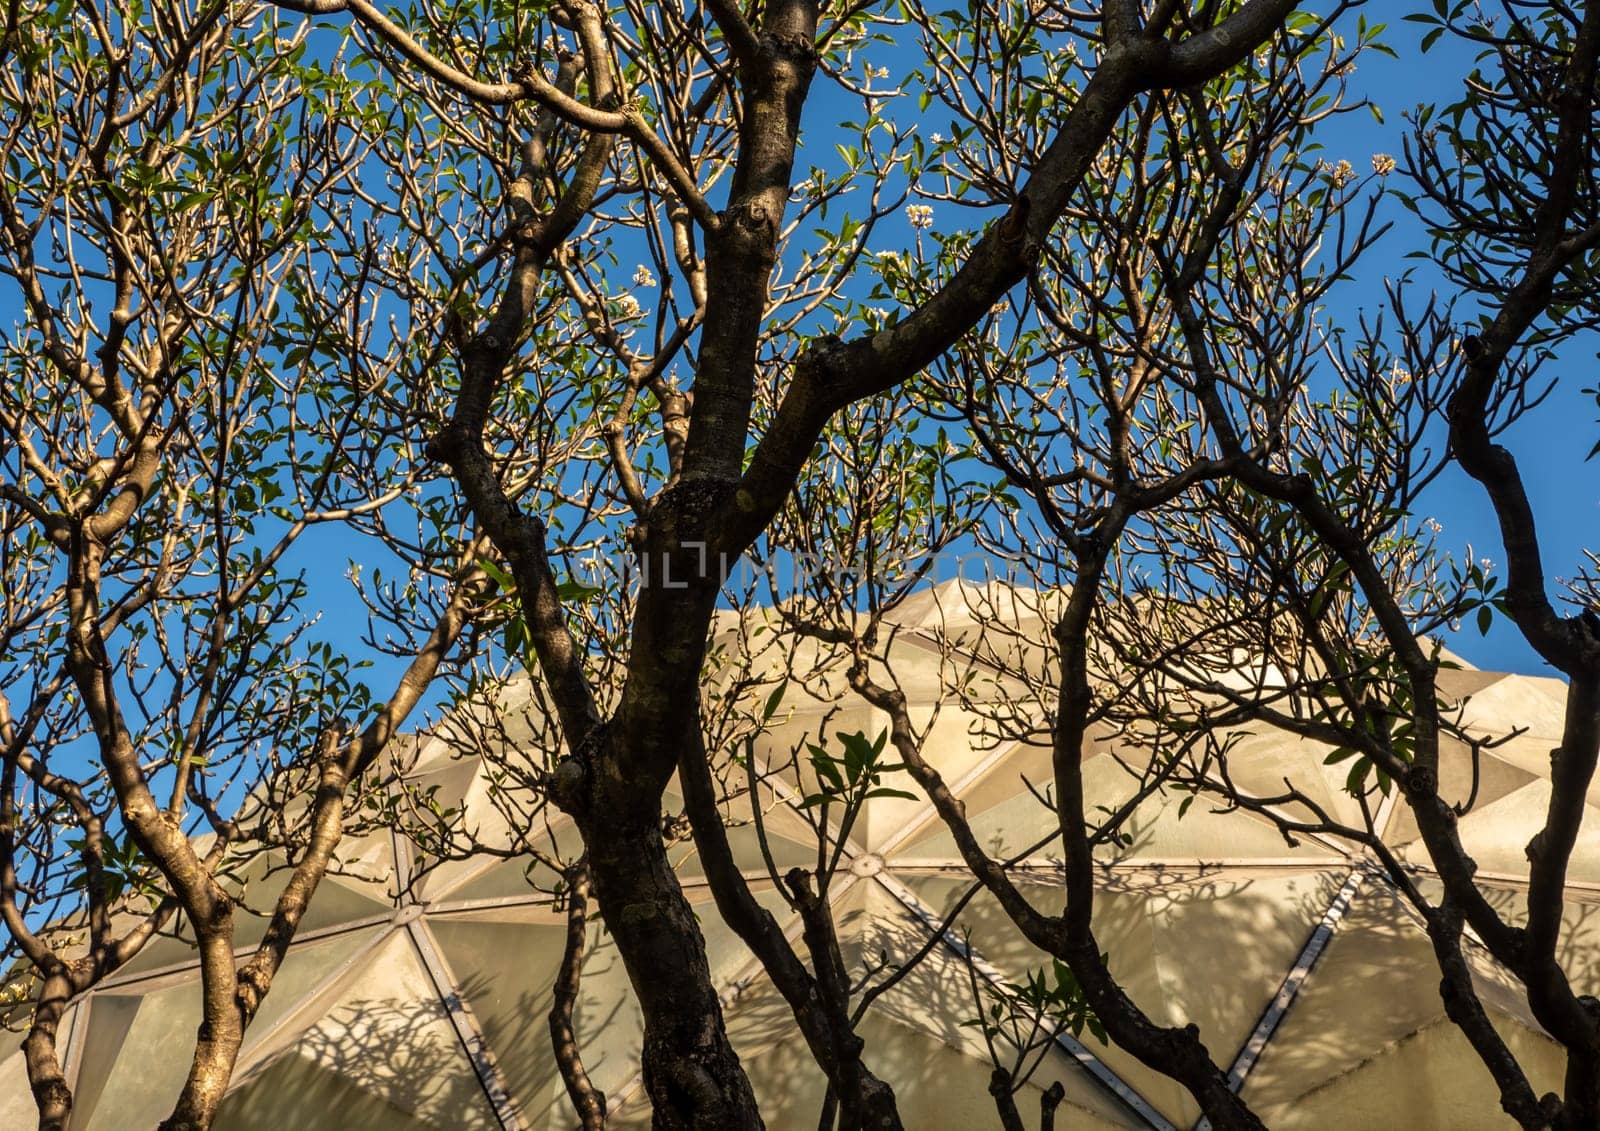 A grove of frangipani trees surrounds the dome of the desert plants by Satakorn